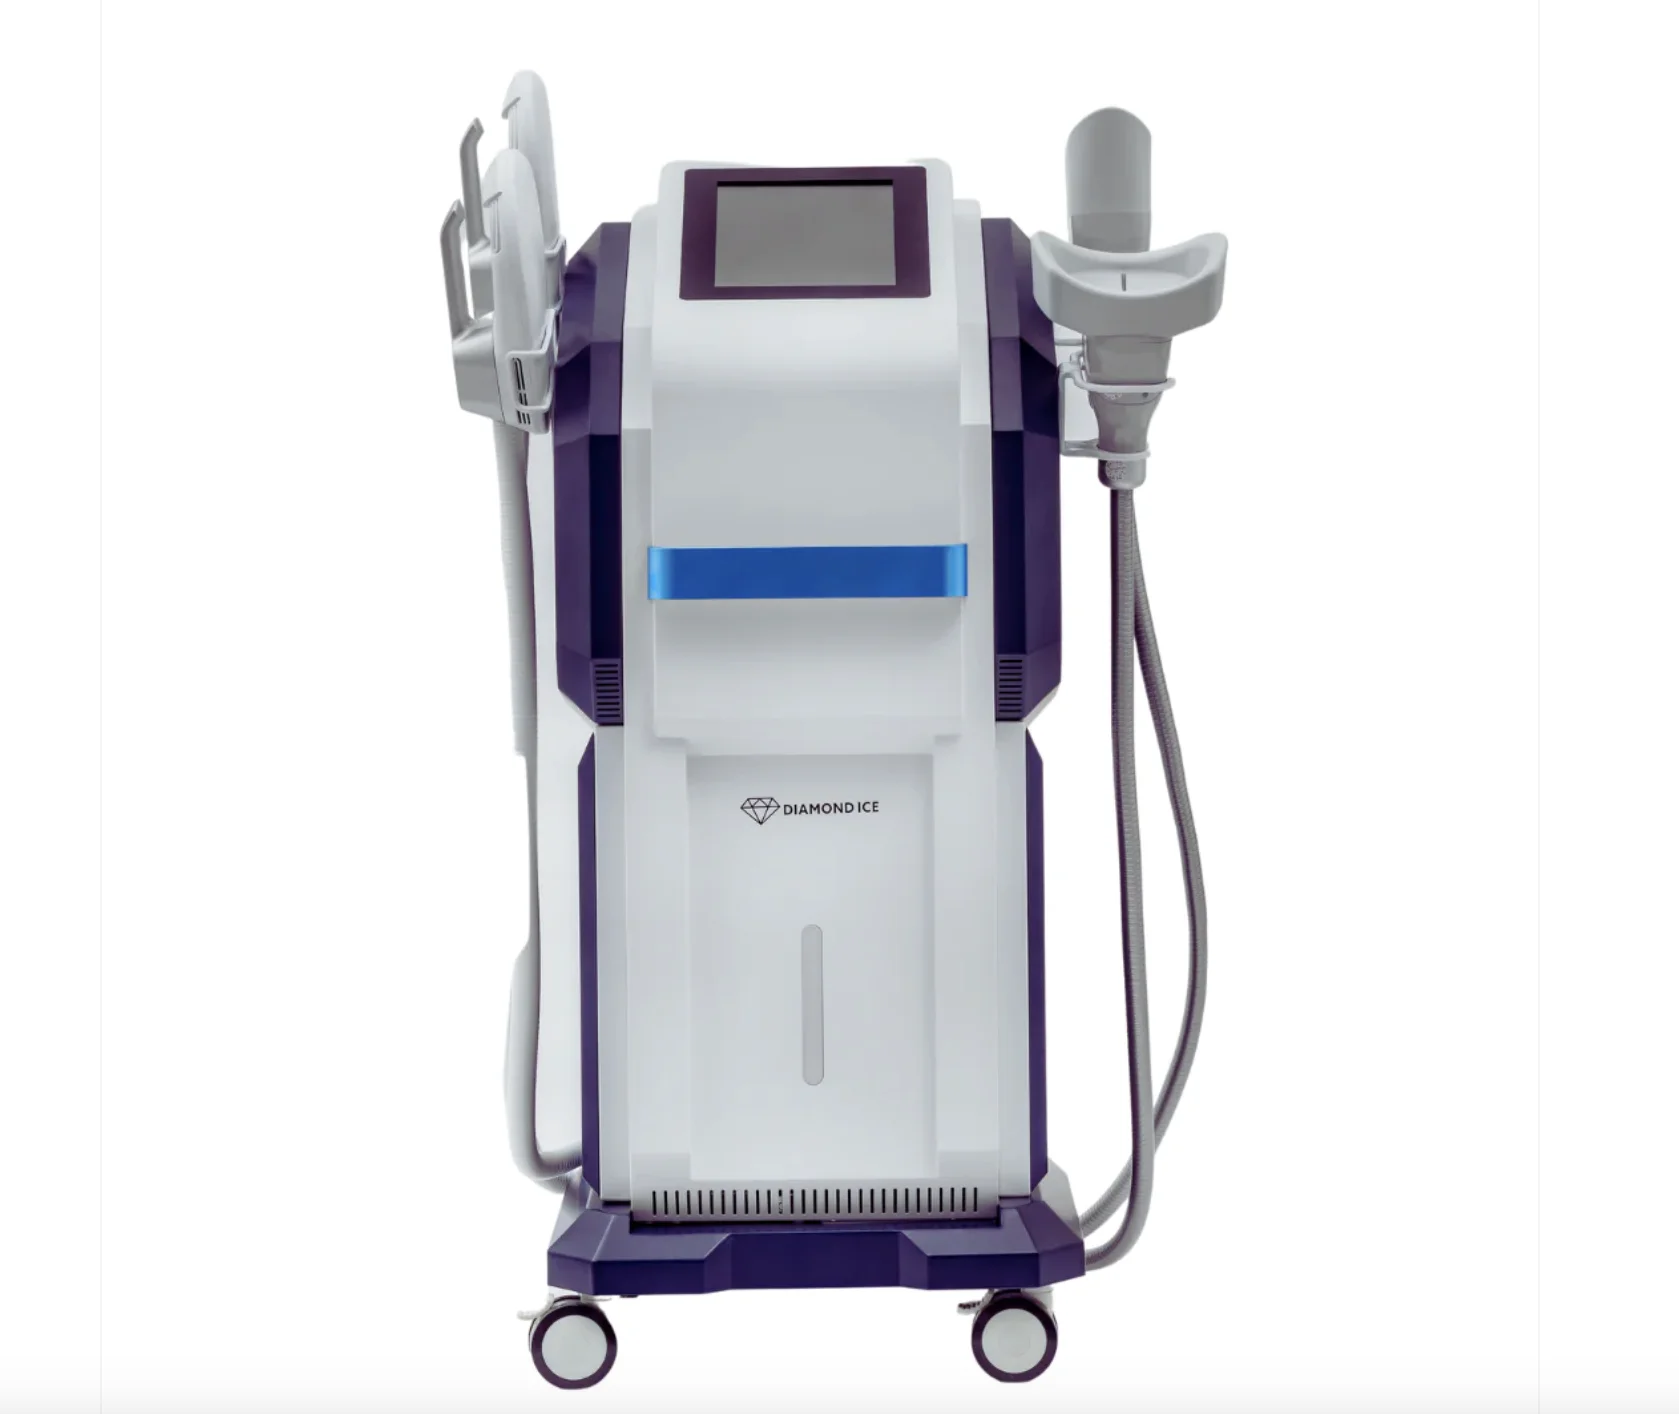 

Ems muscle shaping cryolipolysis machine cryolipolysis slimming machine to reduce cellulite and remove leg fat